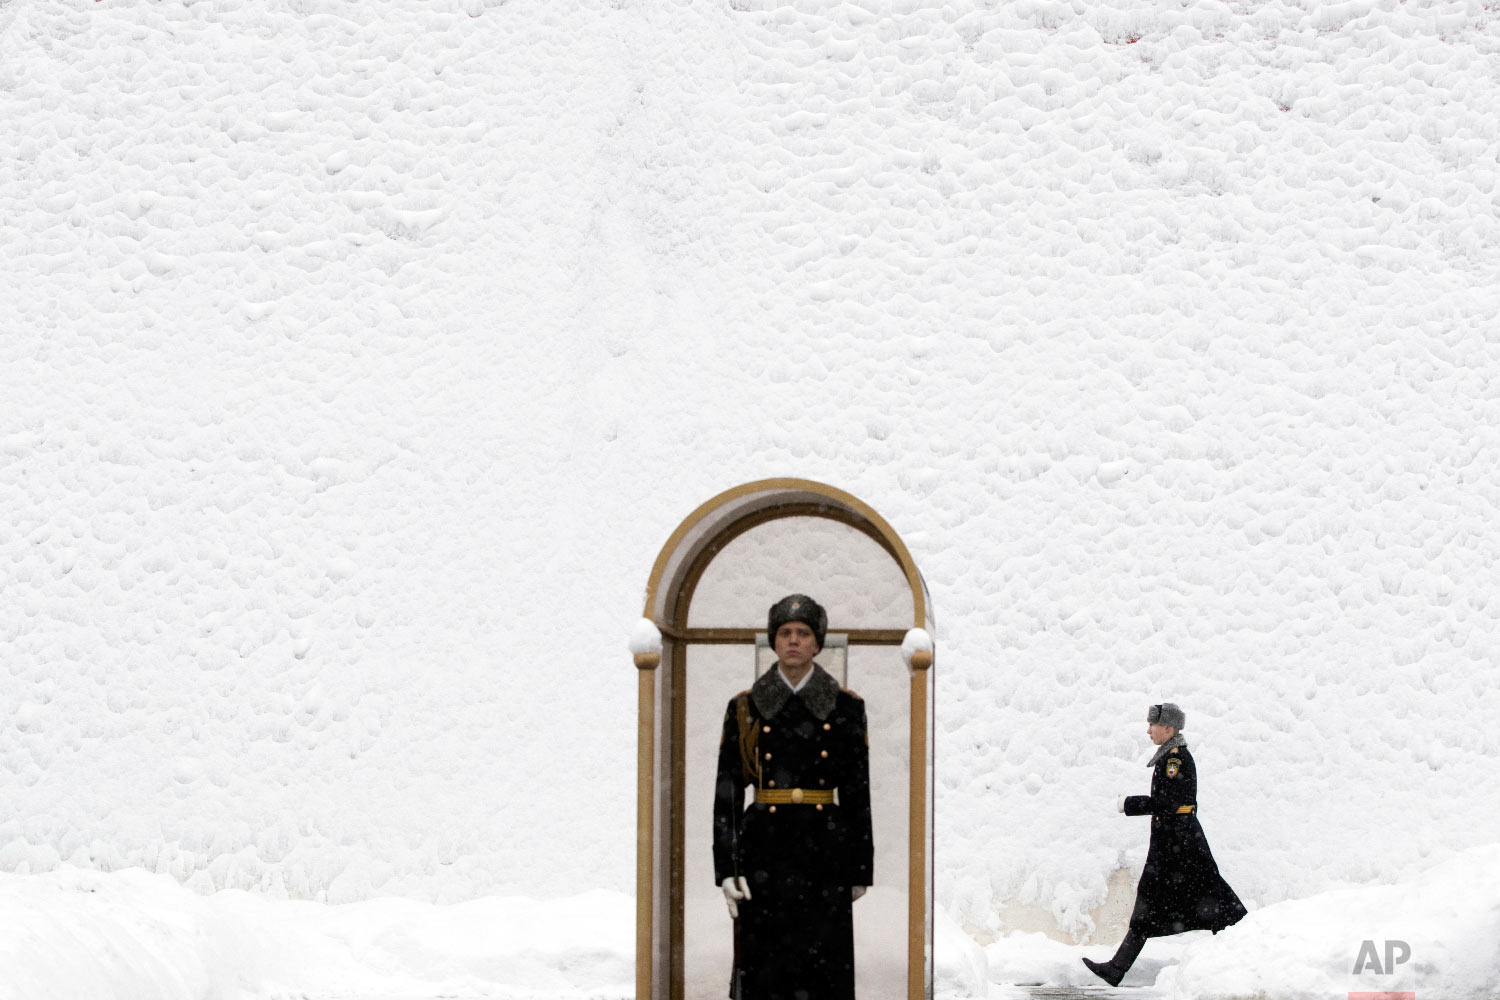  An Honor guard soldier walks along the Kremlin wall, covered by snow, as his fellow soldier stands at the Tomb of Unknown Soldier in Moscow, Russia on Jan. 31, 2018. (AP Photo/Pavel Golovkin) 